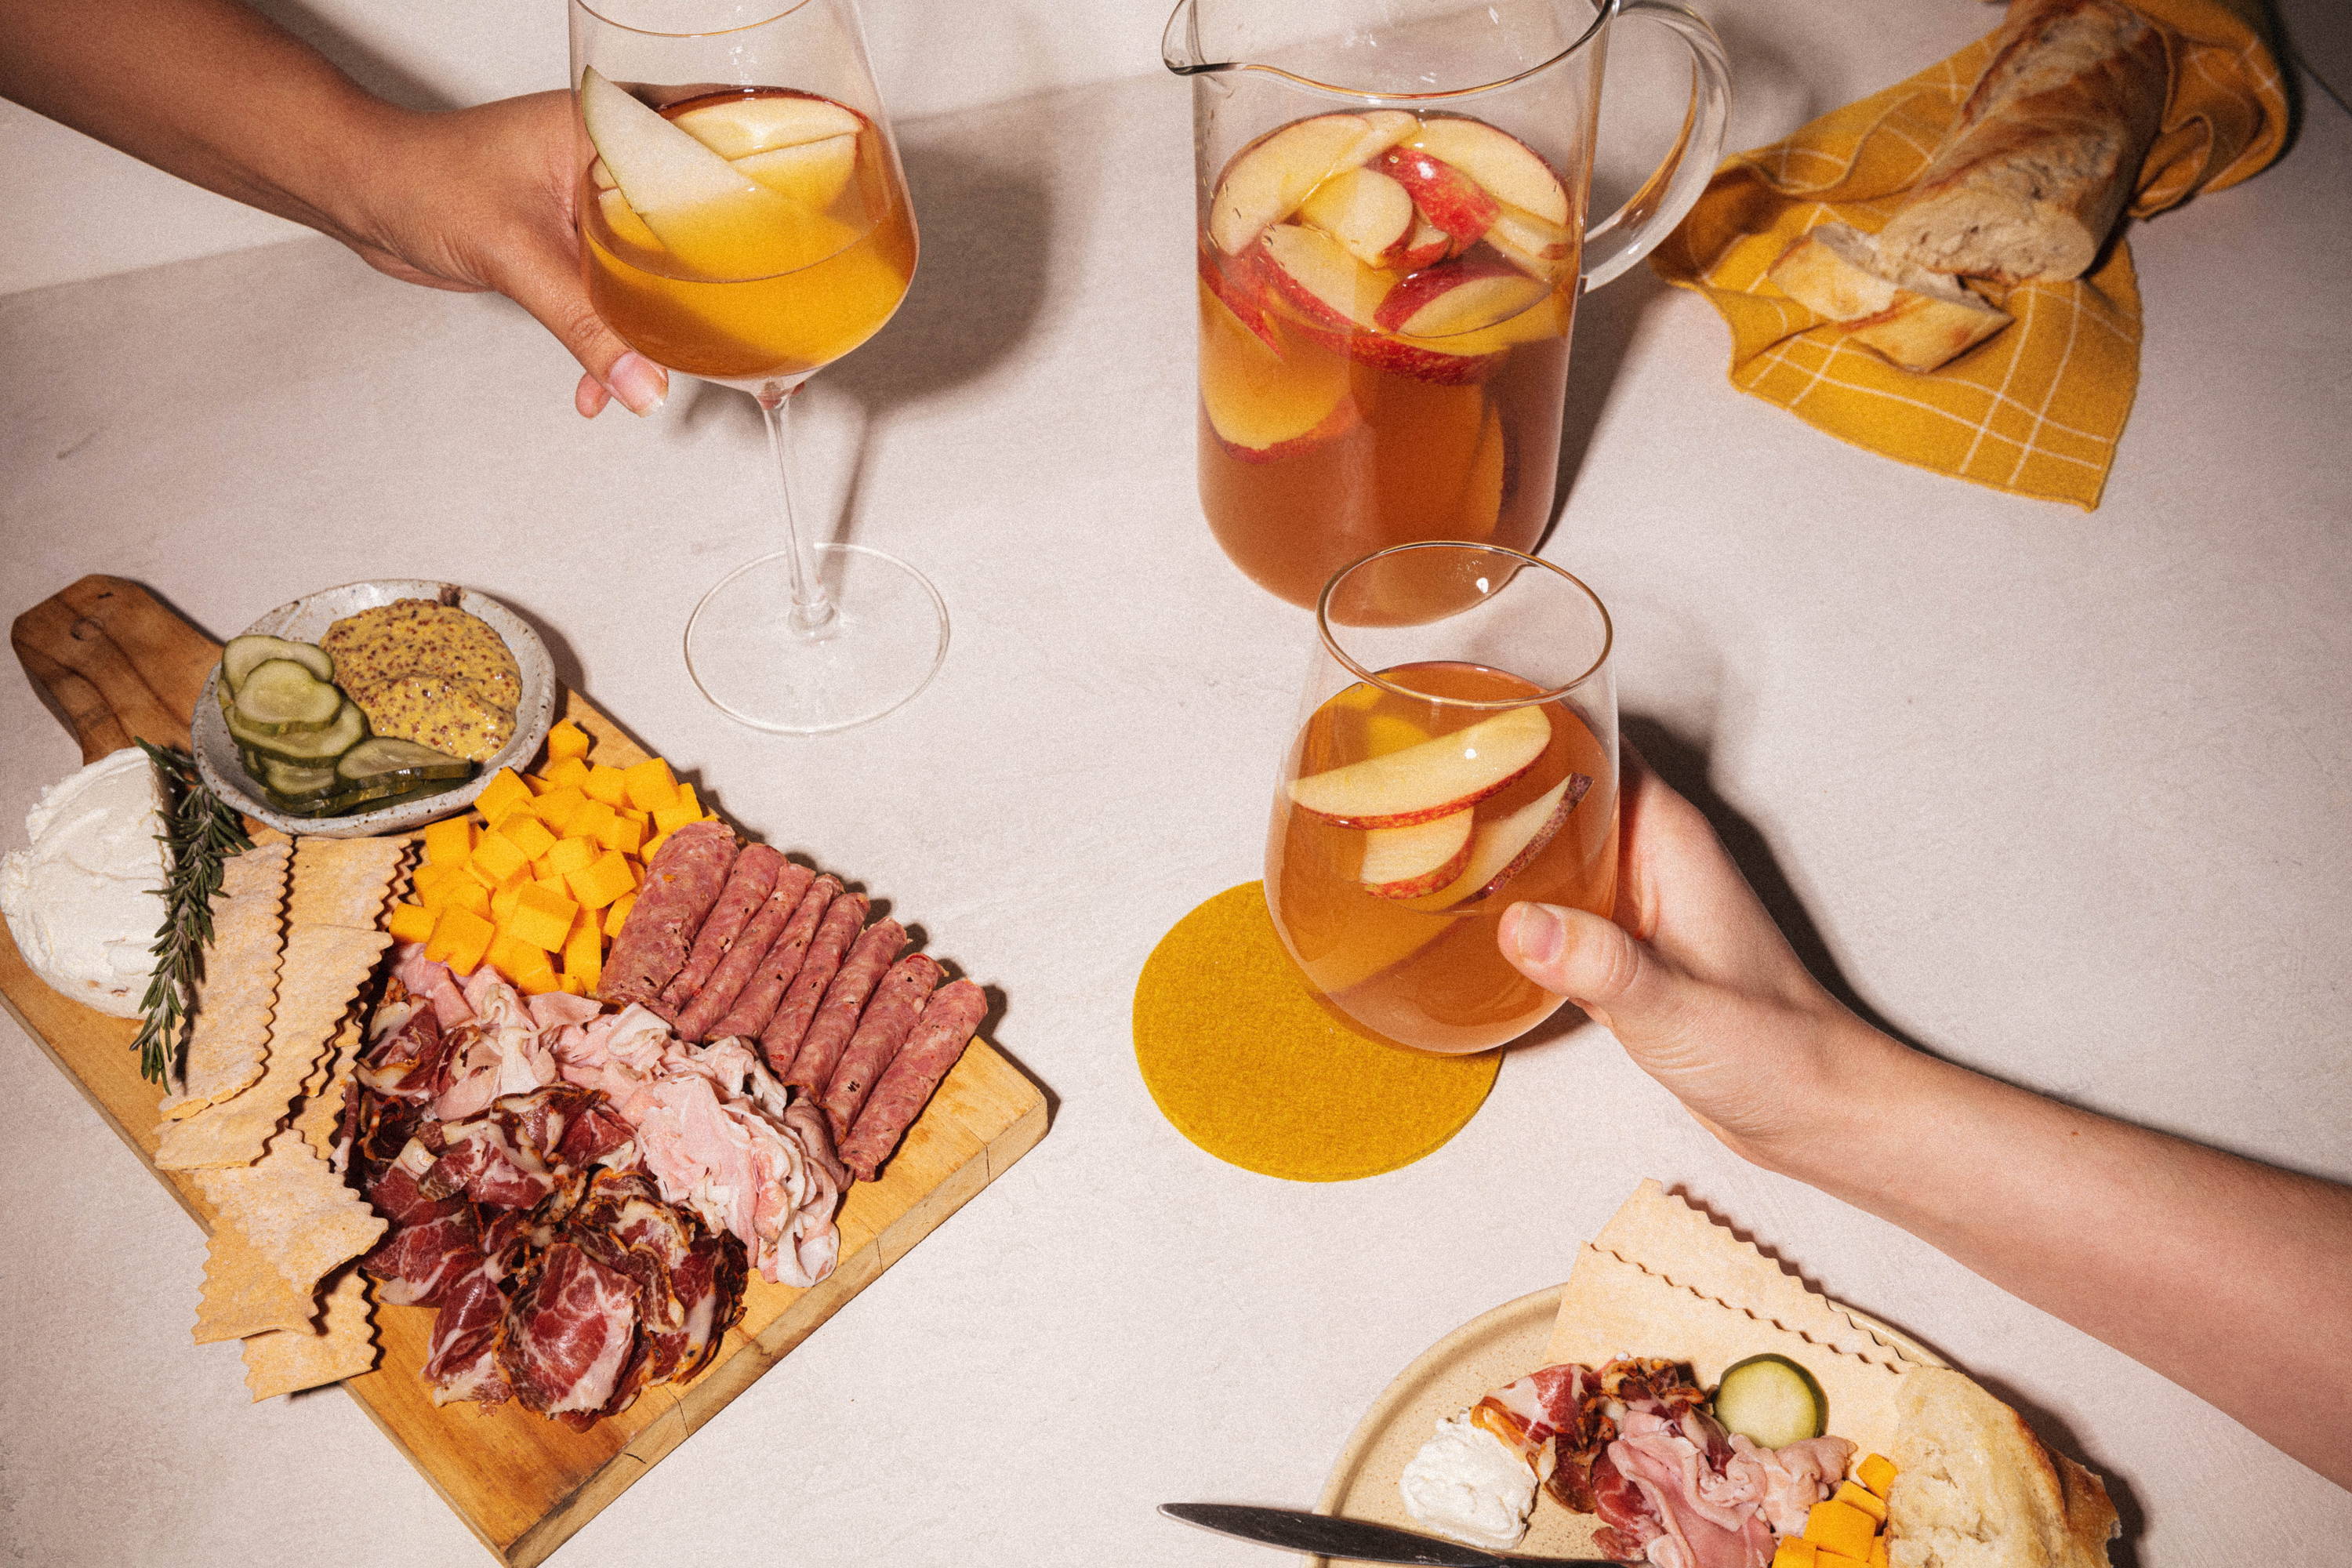 Holding wine glasses of apple cider with charcuterie board on table